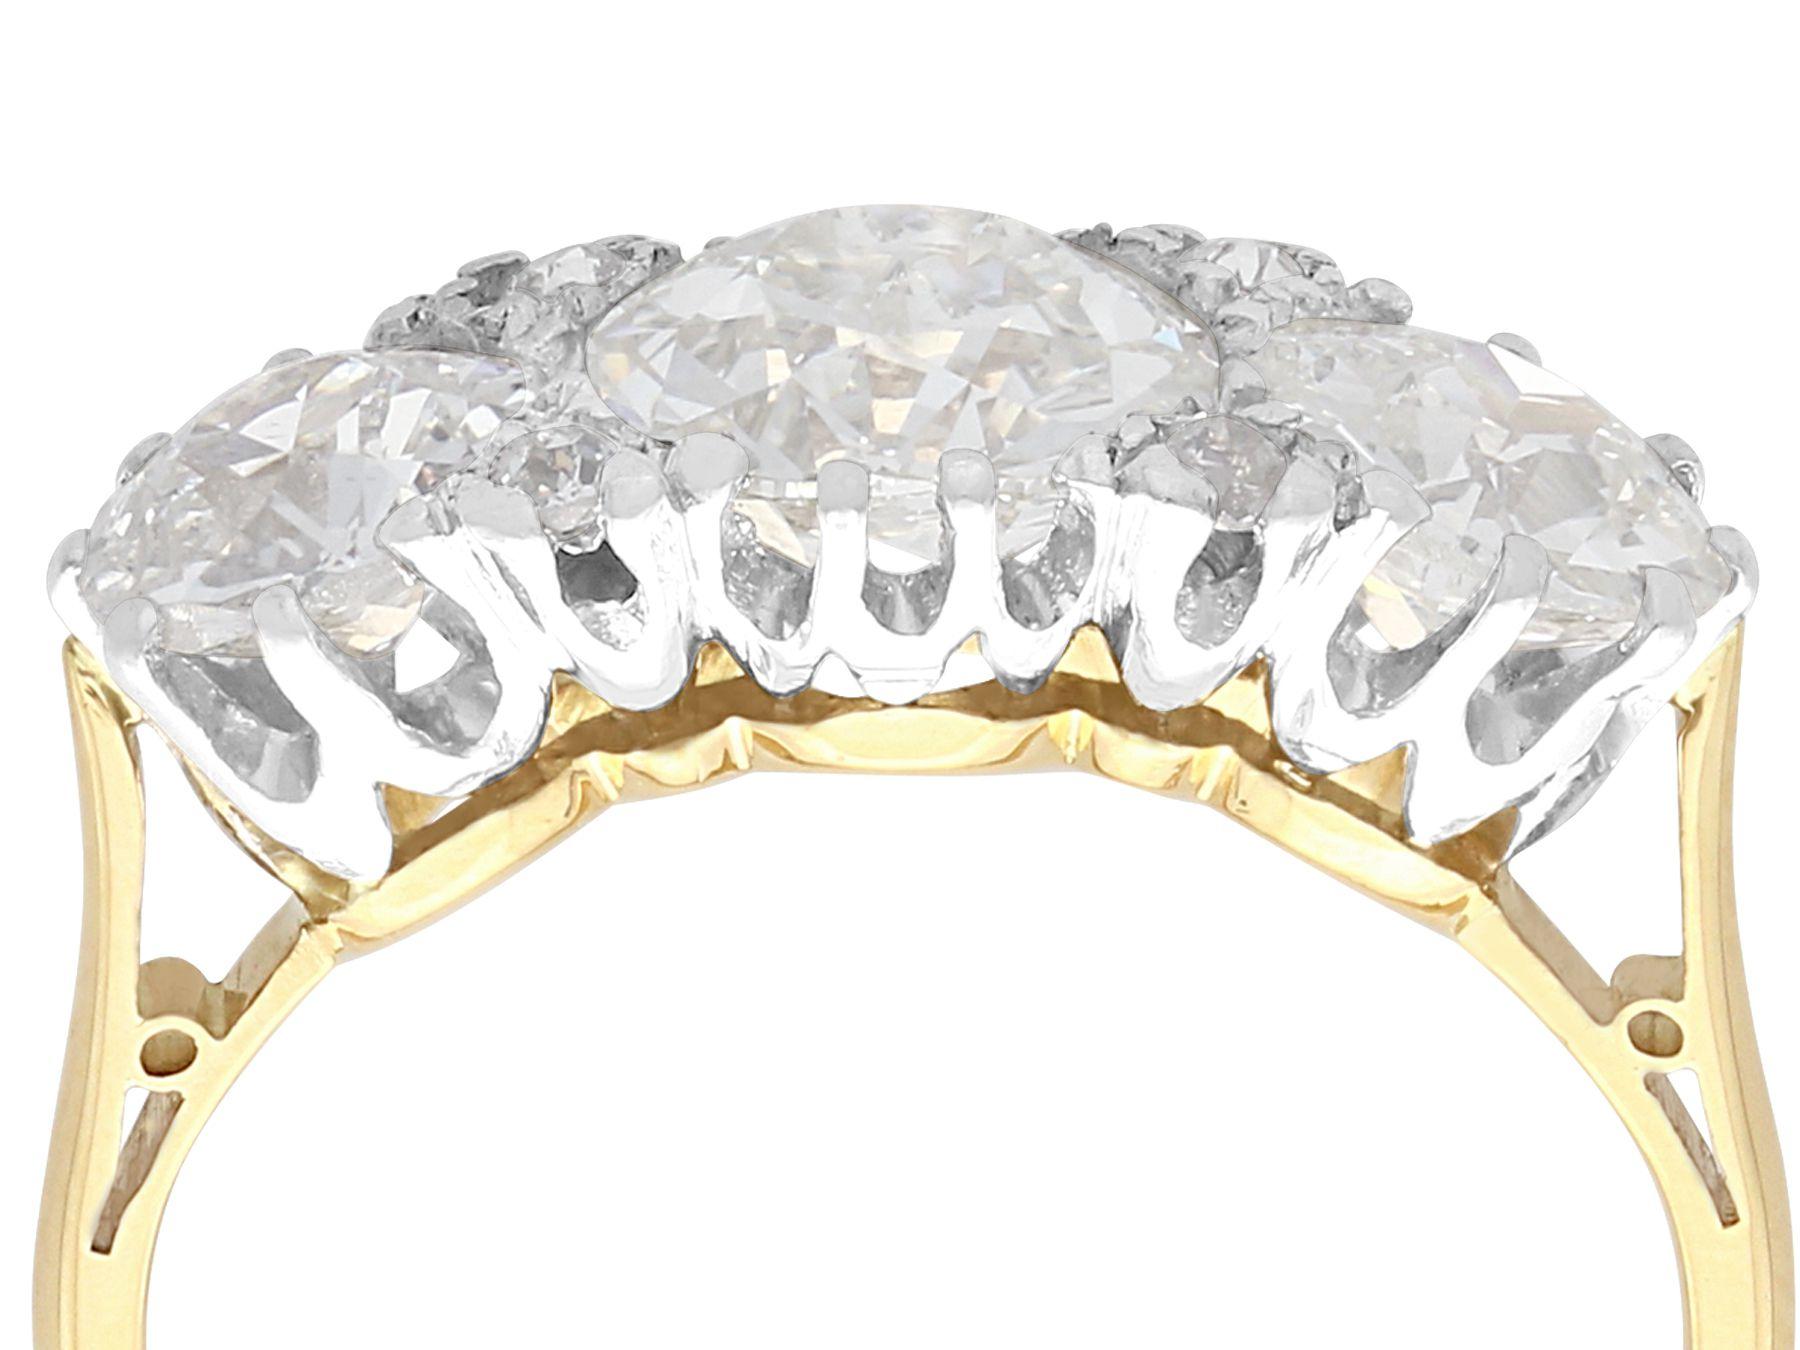 A stunning, fine and impressive vintage 2.76 carat diamond, 18 karat yellow gold and platinum trilogy ring; part of our diverse vintage diamond jewelry collections

This stunning, fine and impressive vintage trilogy ring has been crafted in 18k